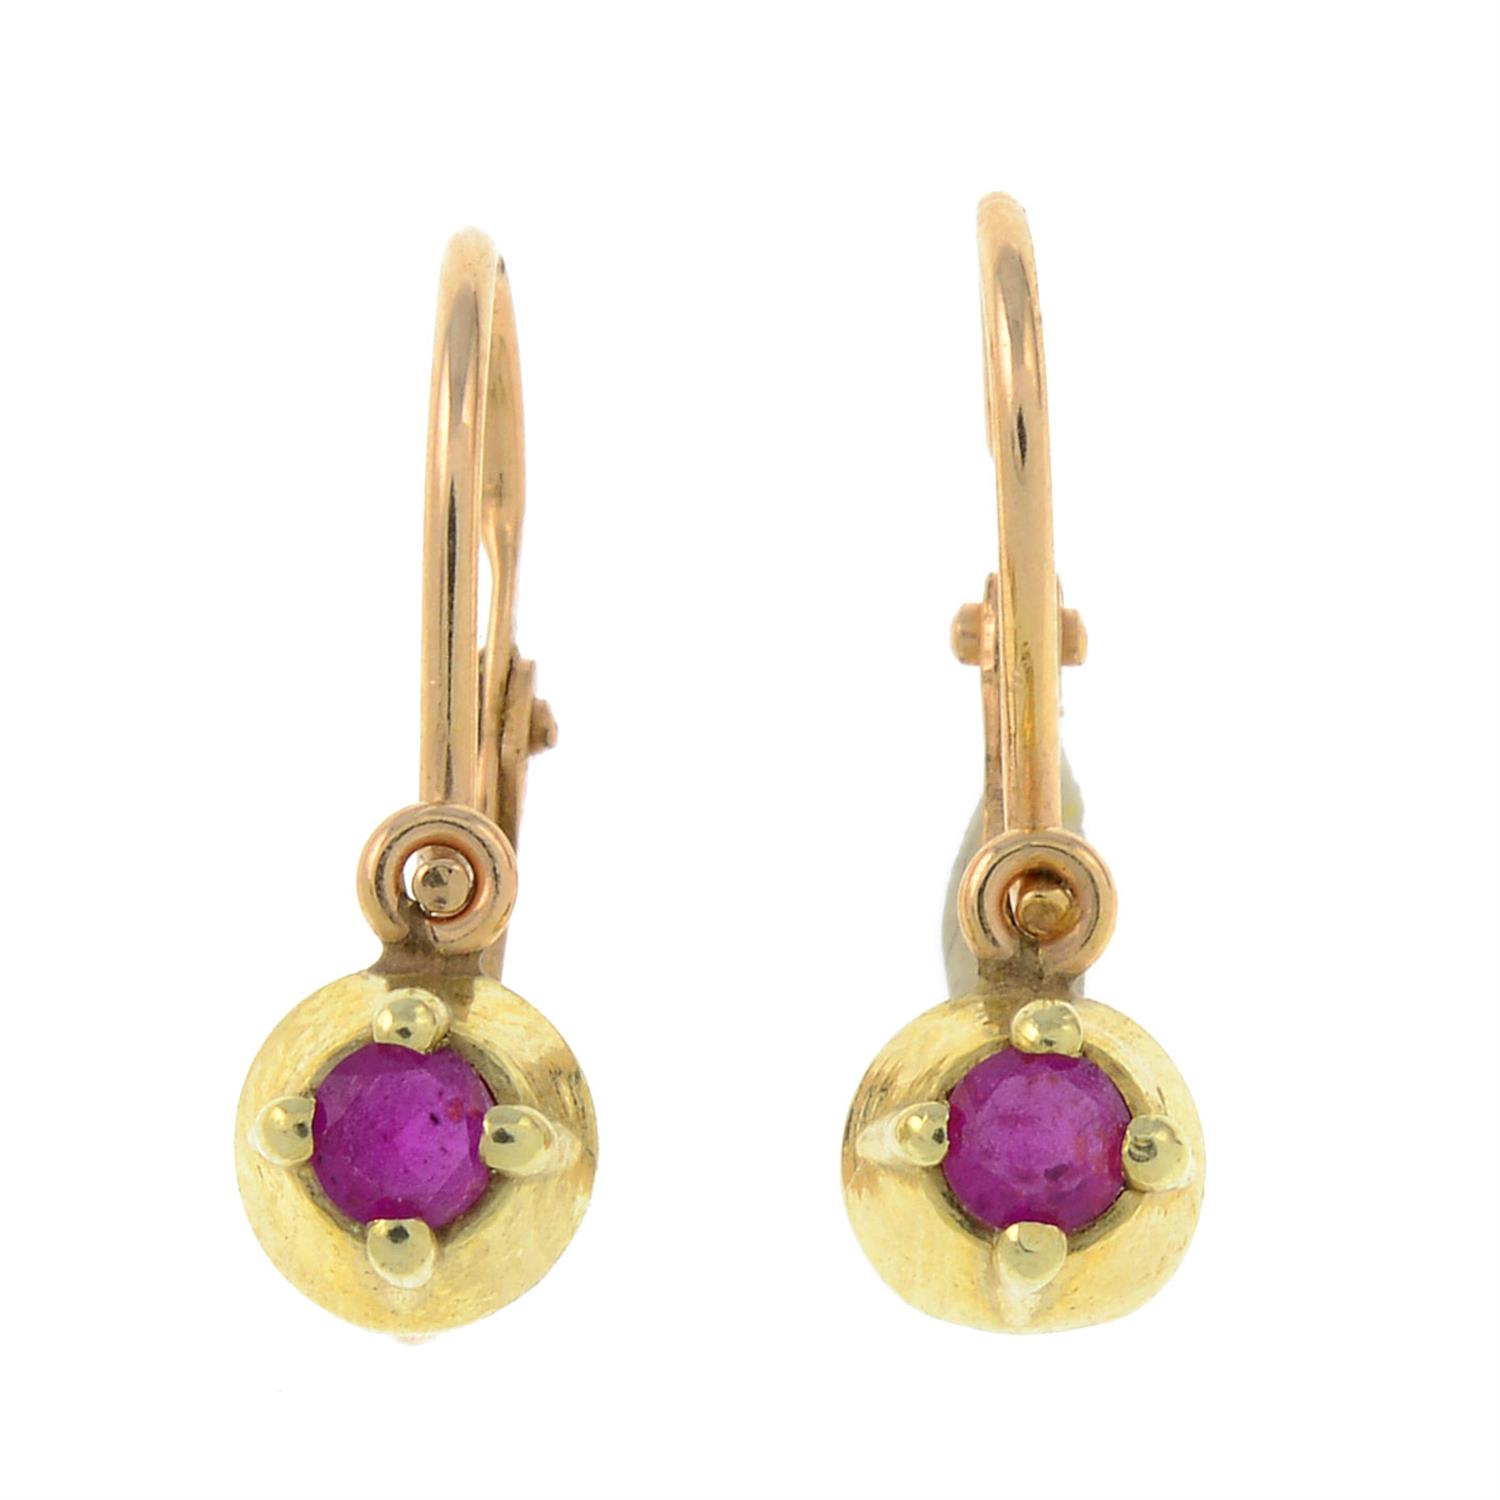 A pair of synthetic ruby drop earrings.